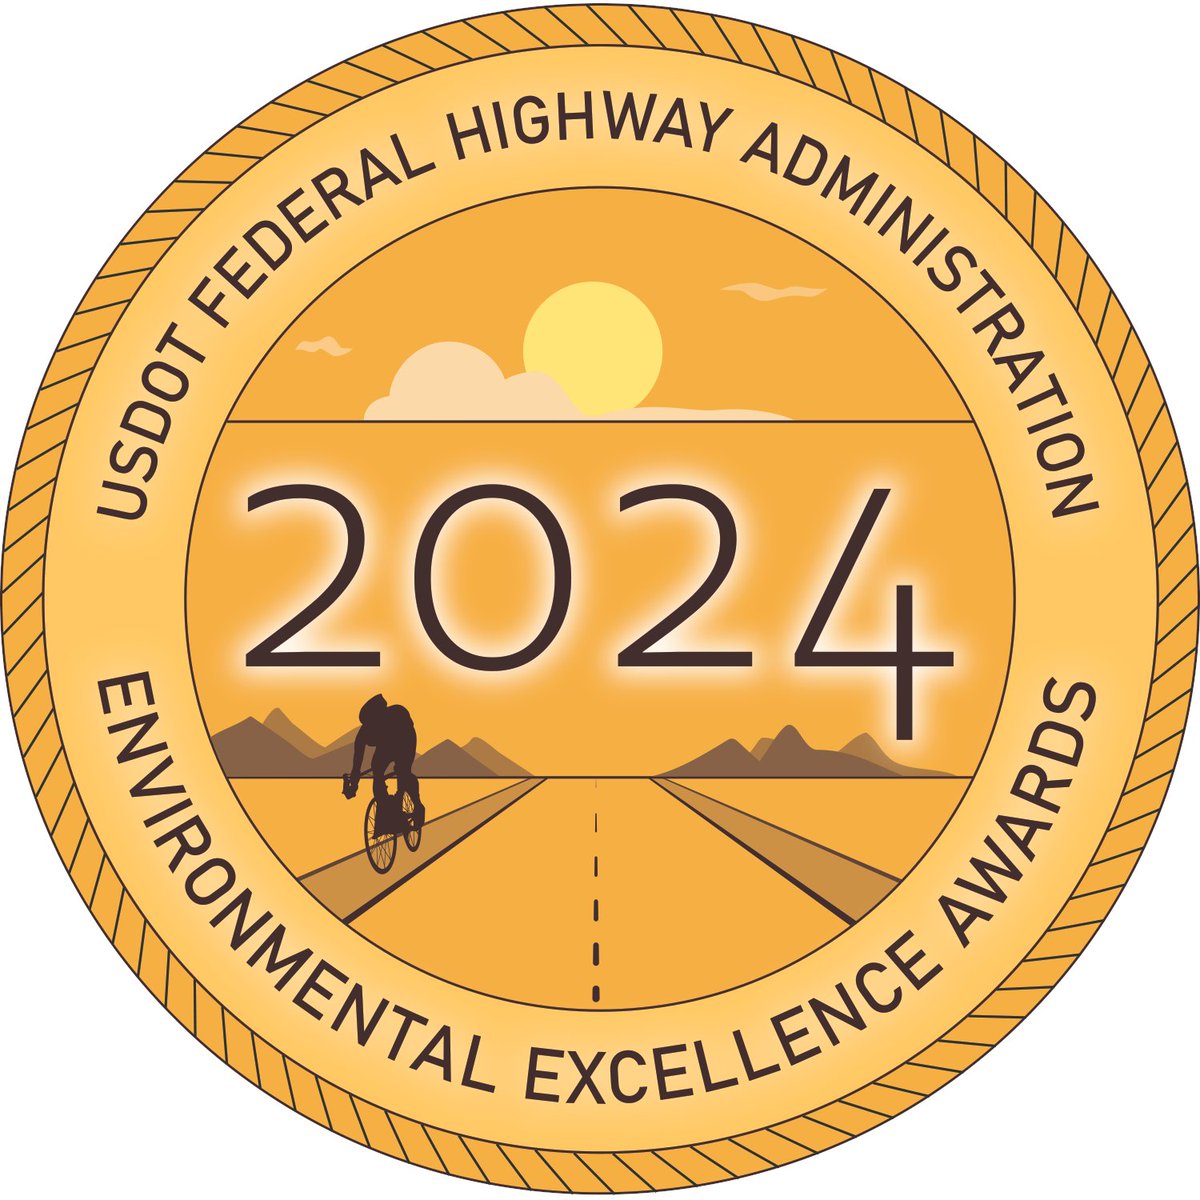 FHWA is excited to announce the 2024 Environmental Excellence Award recipients! This biennial program recognizes outstanding transportation projects, processes, and partners that achieve environmental excellence. fhwa.dot.gov/environment/en…